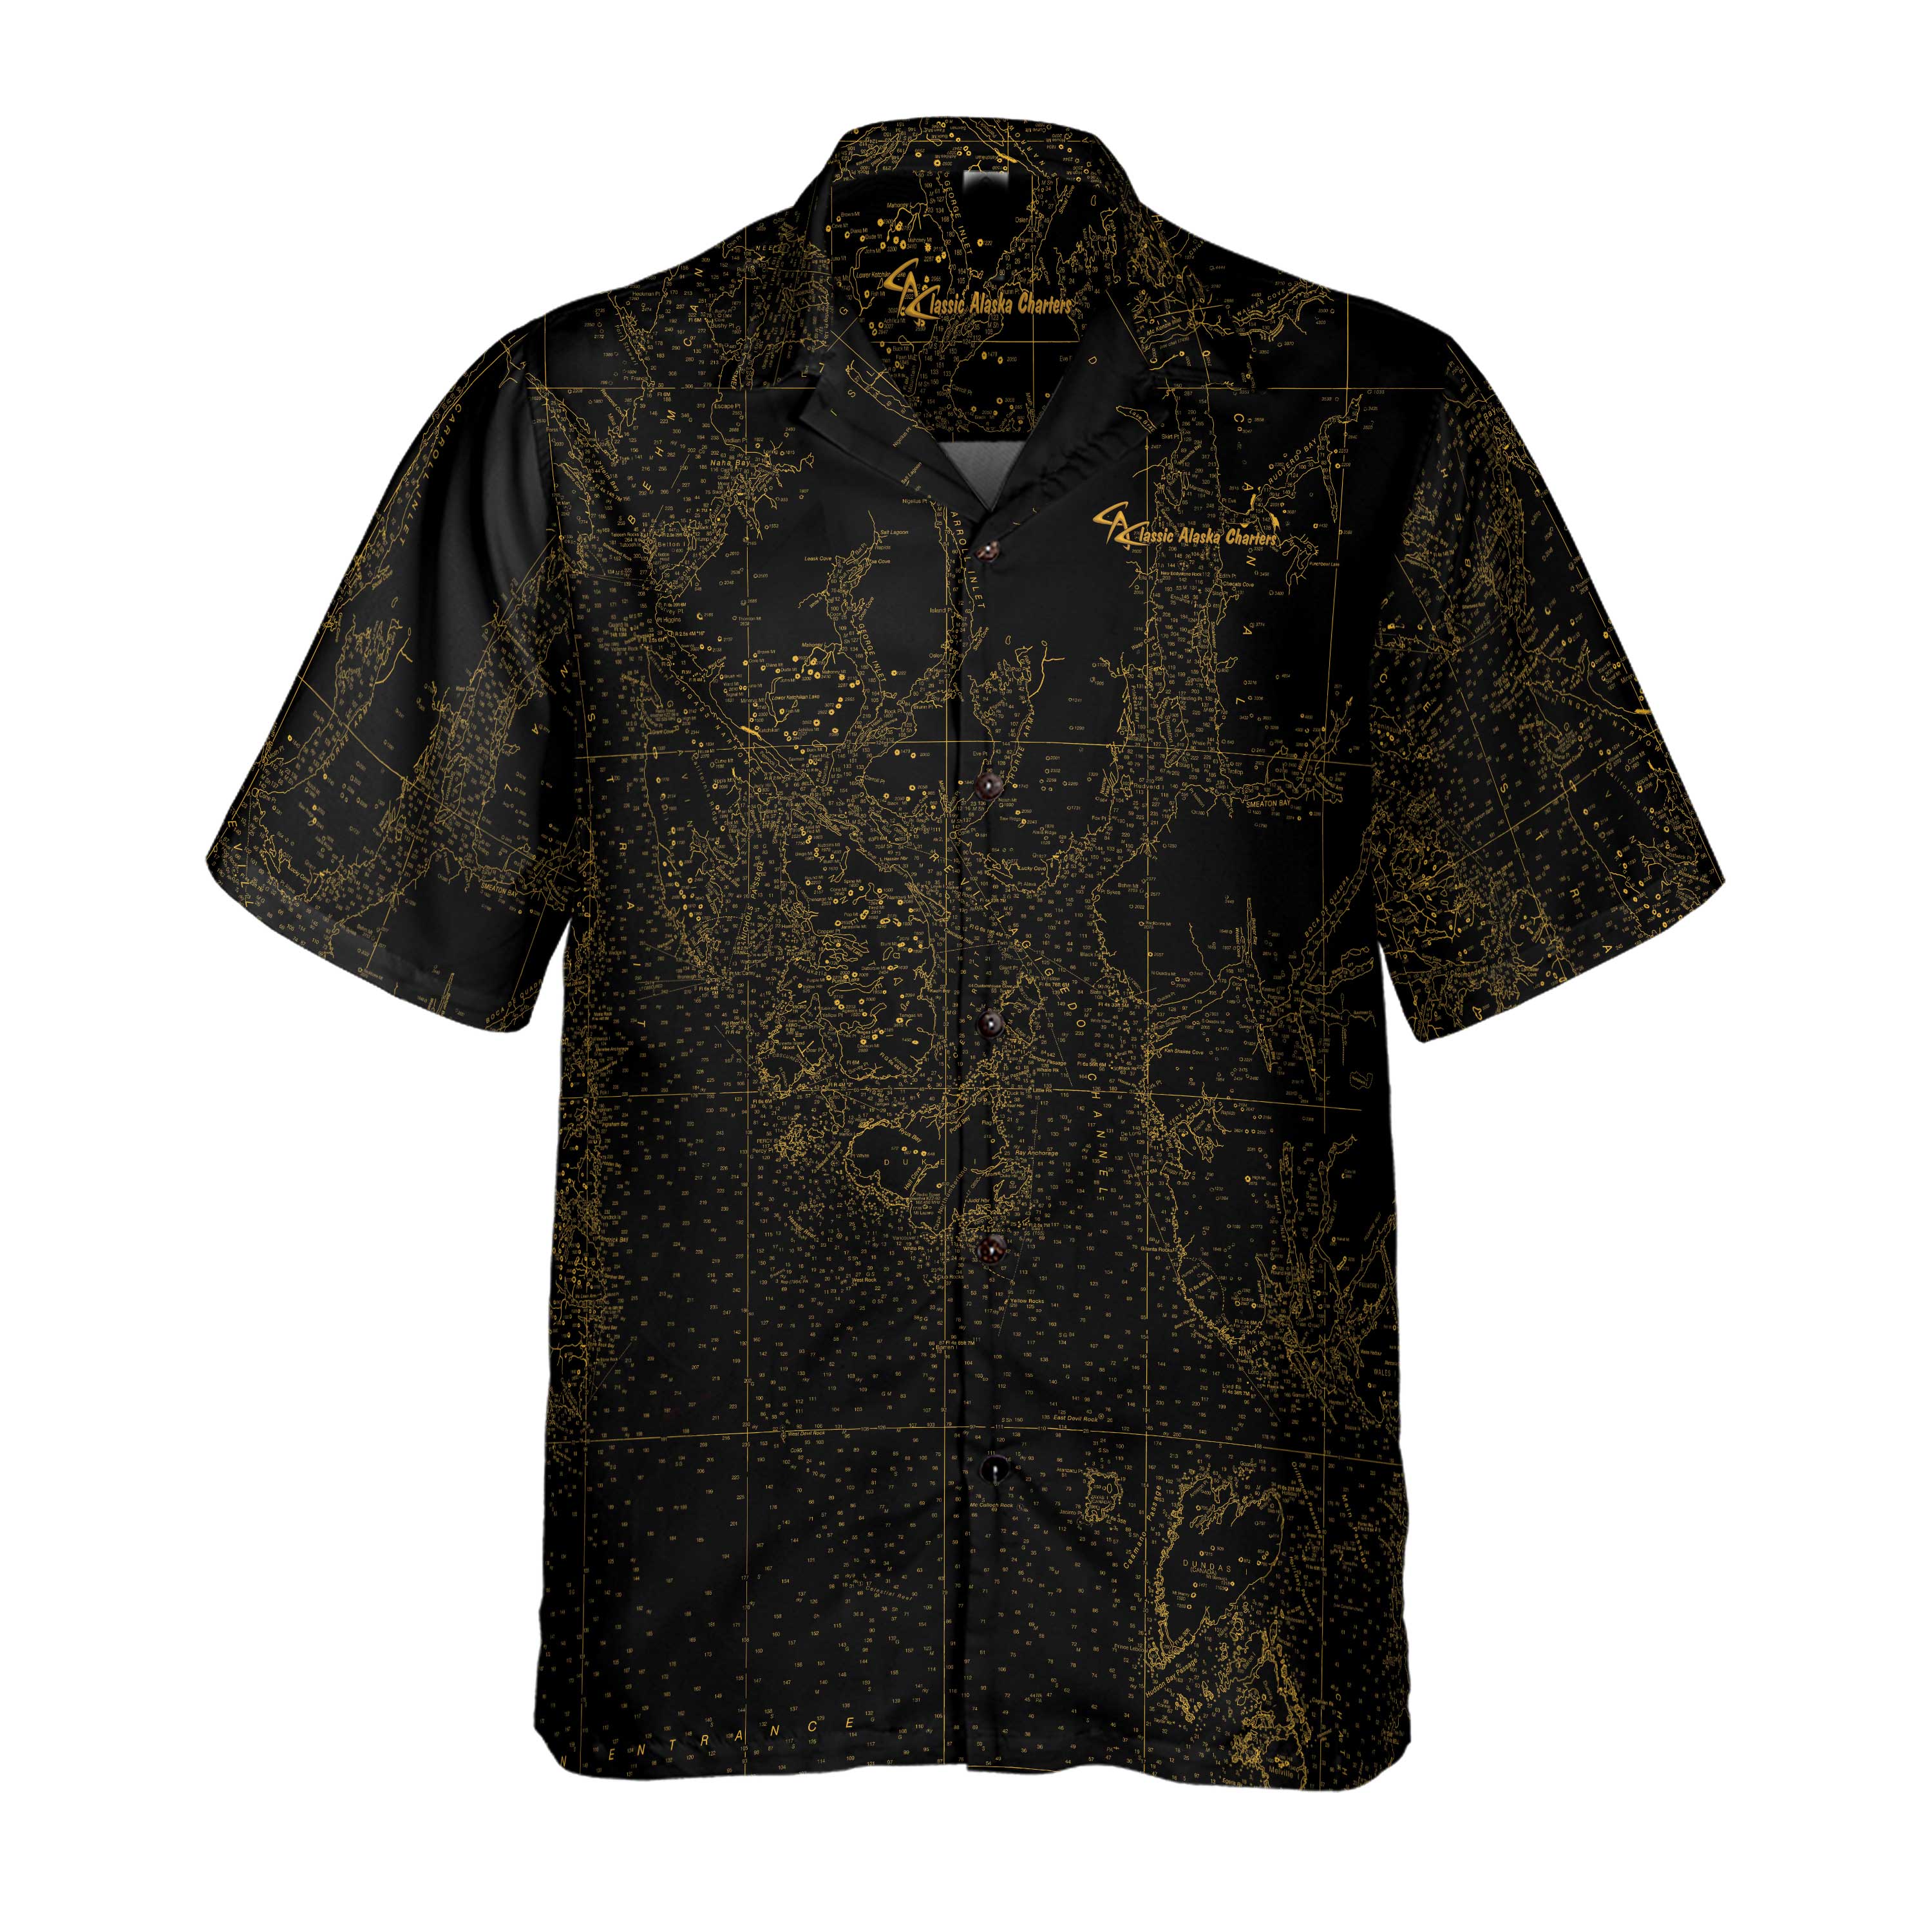 The CAC Midnight Gold Coconut Button Camp Shirt